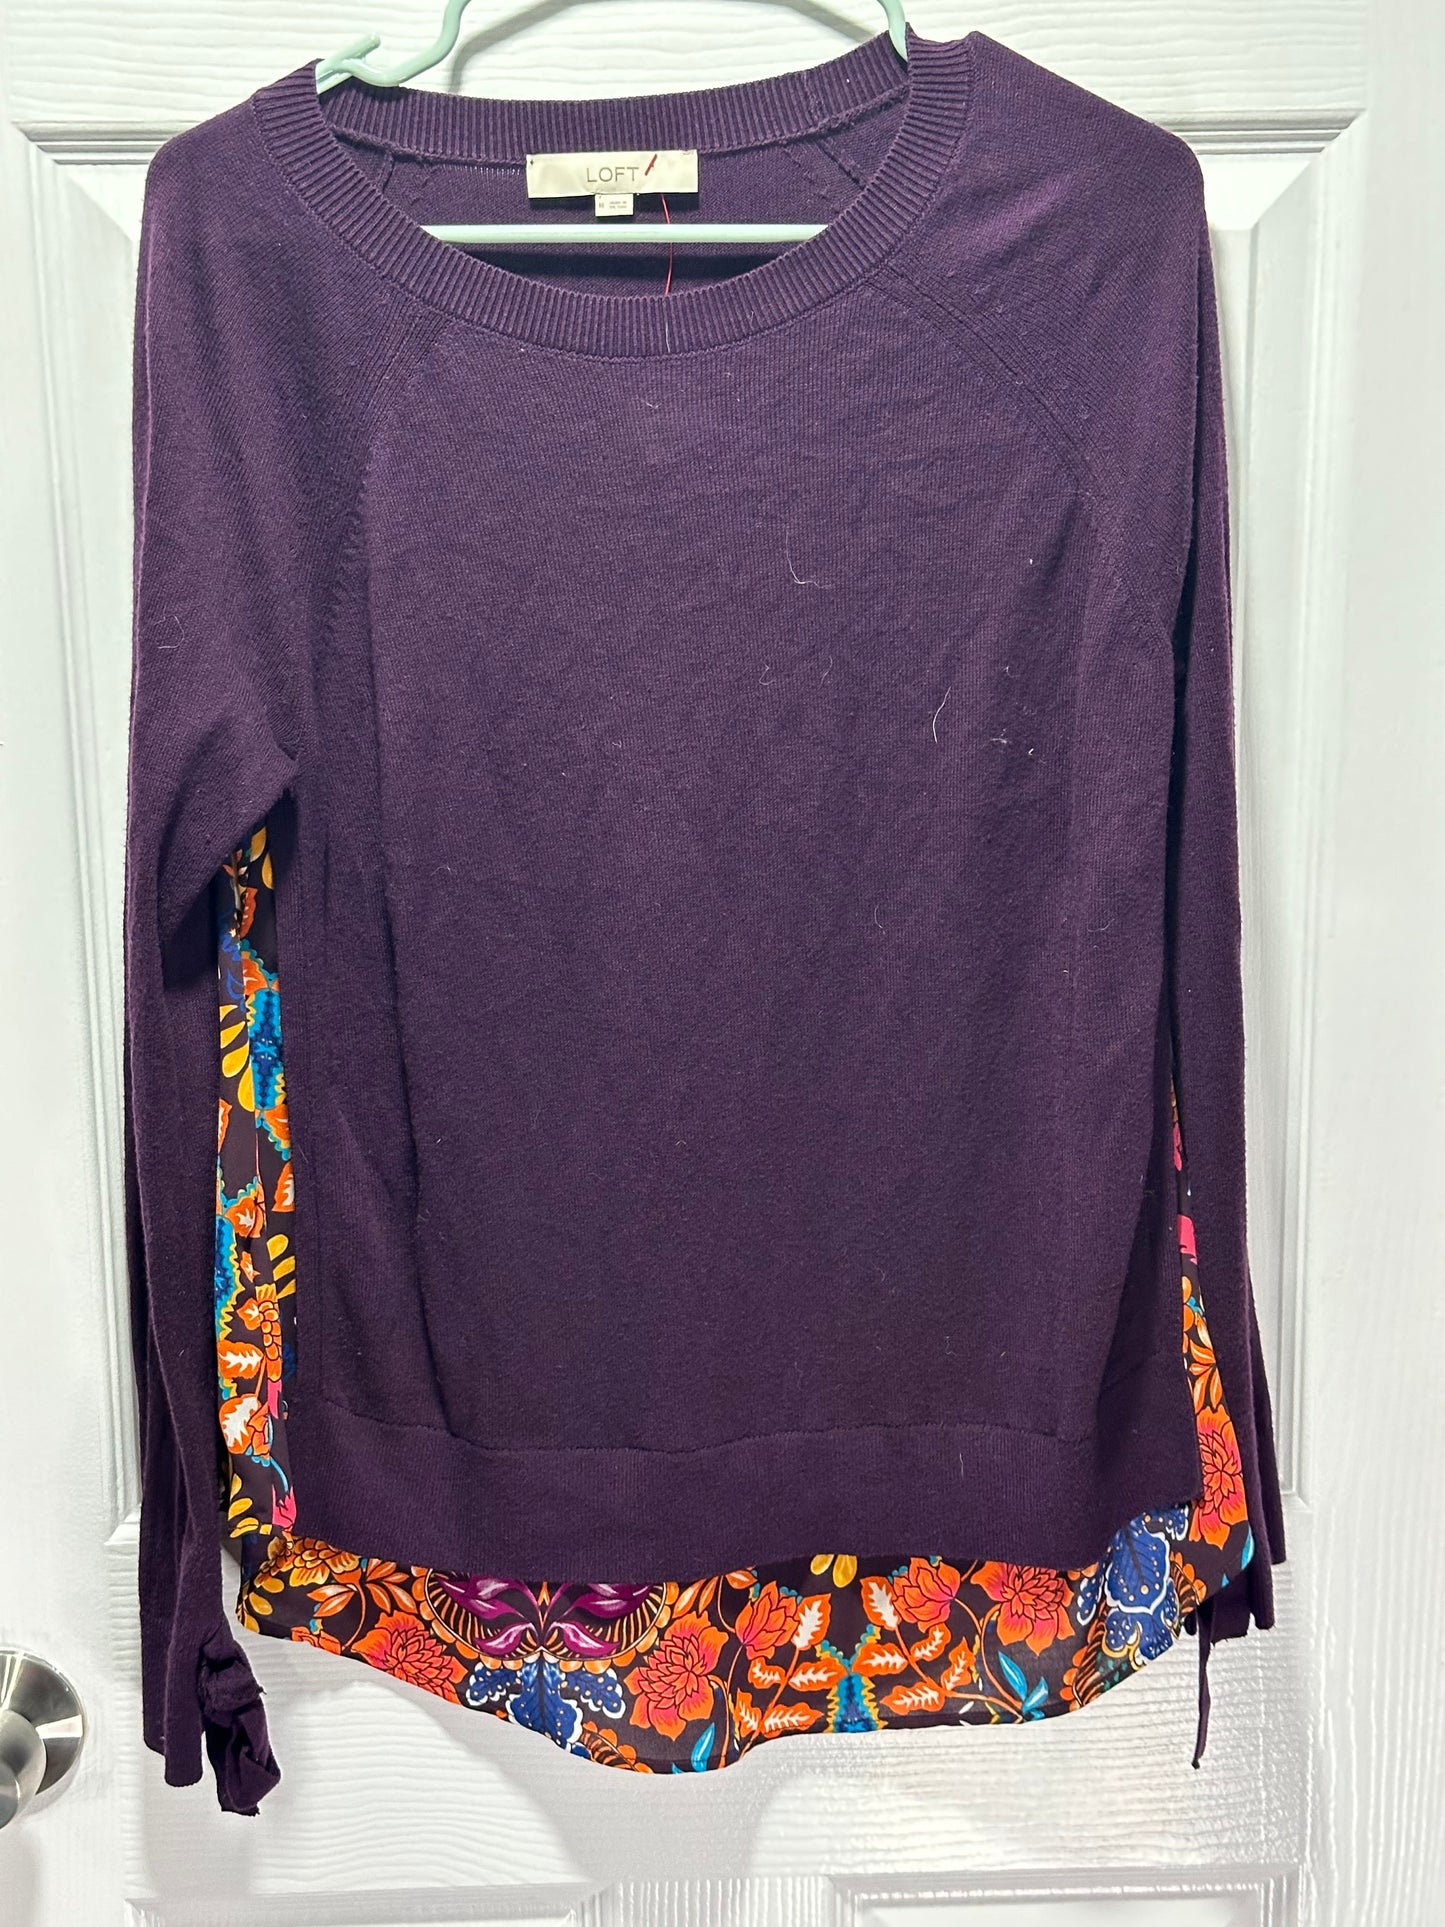 Loft Plum Sweater with Colorful Panel on Back - size M - EUC